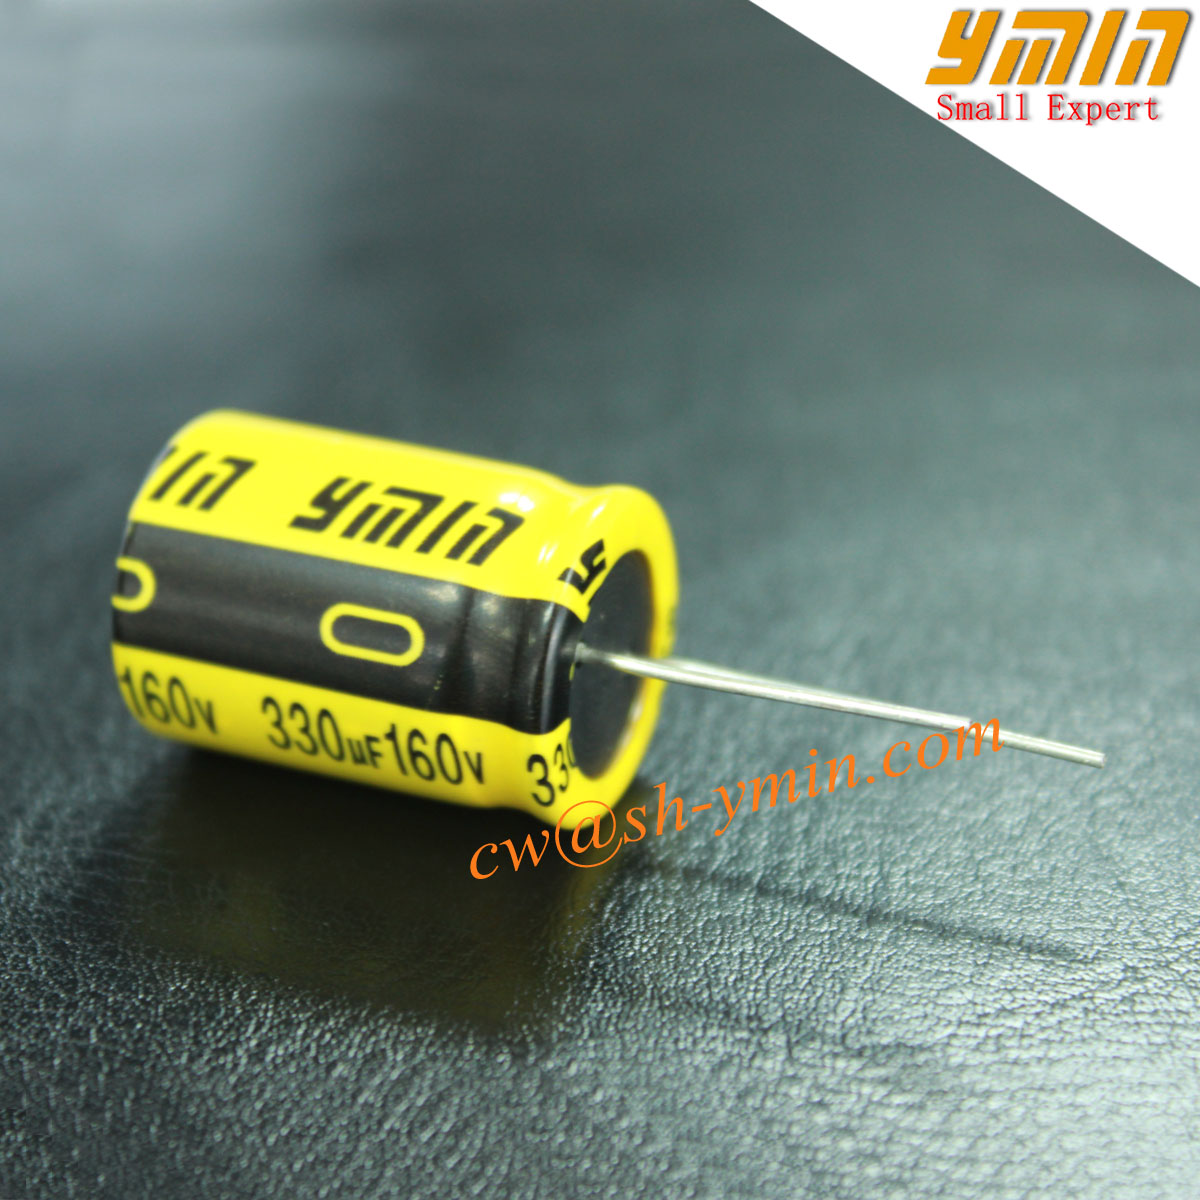 Long Life Capacitor Radial Aluminium Electrolytic Capacitor for Electronic Ballast RoHS